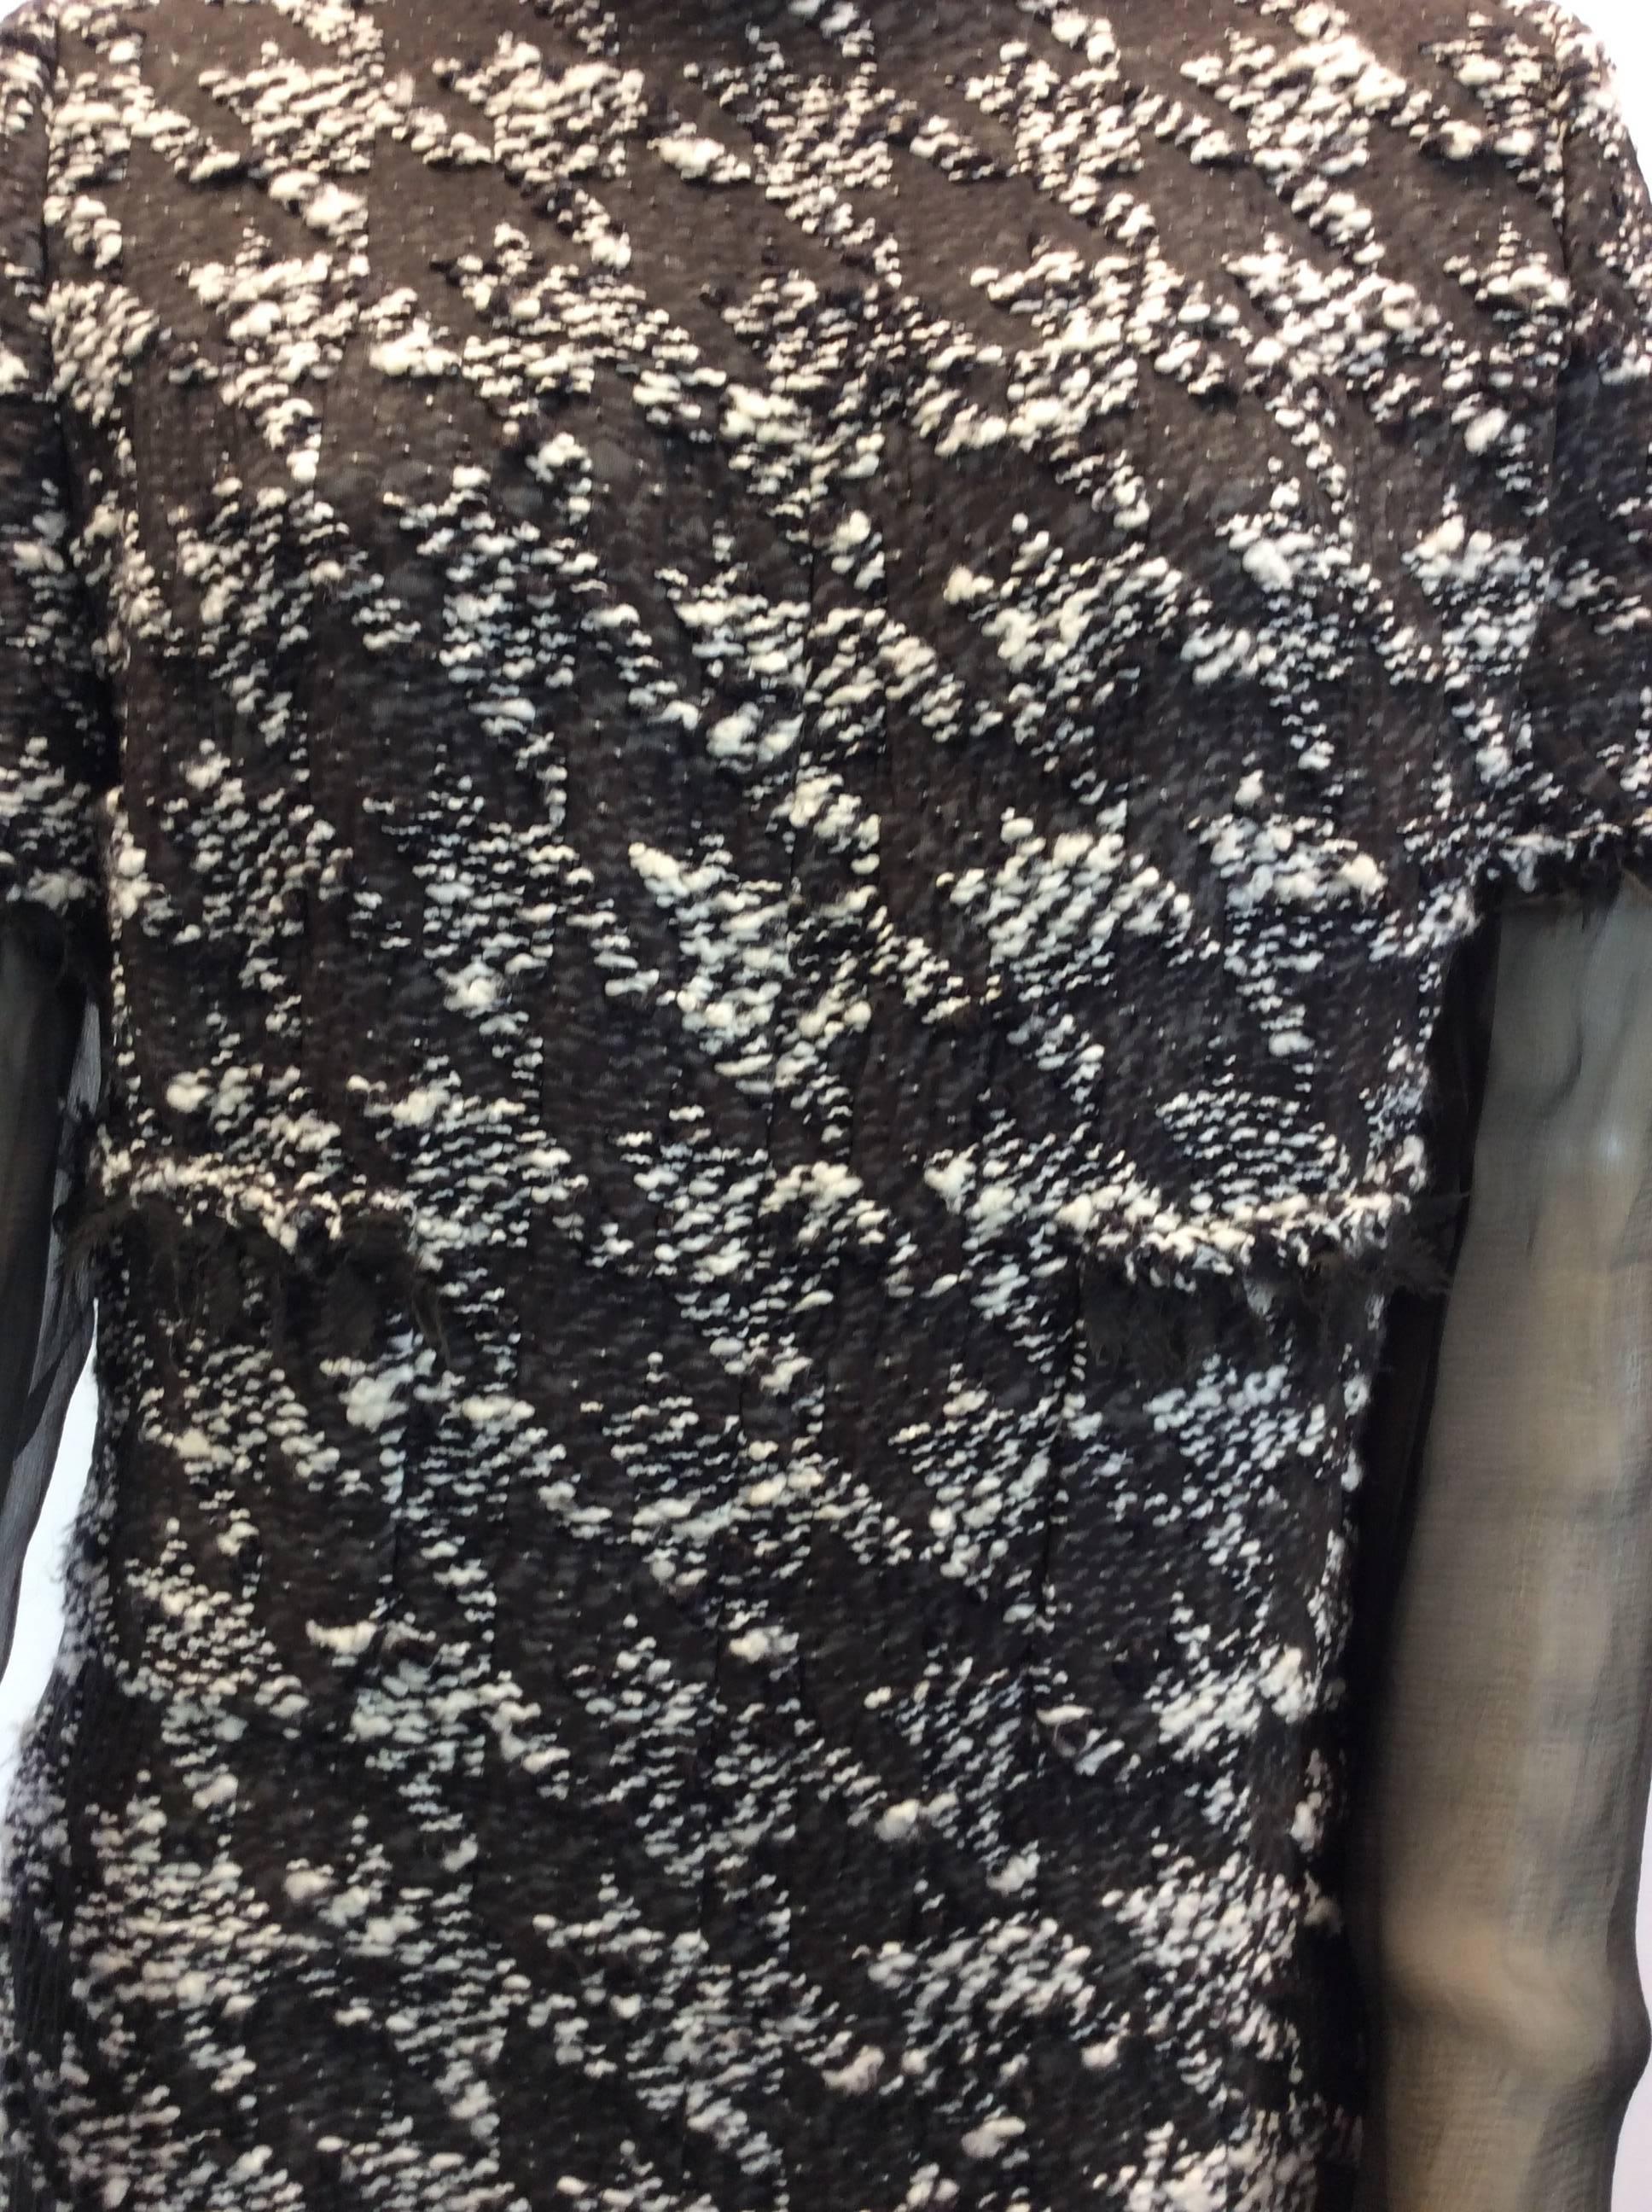 Chanel Tweed & Sheer Dress
Brown and white tweed print
Small pull on the back, please see photo
Black sheer detail on sleeves and skirt of dress
$1250

